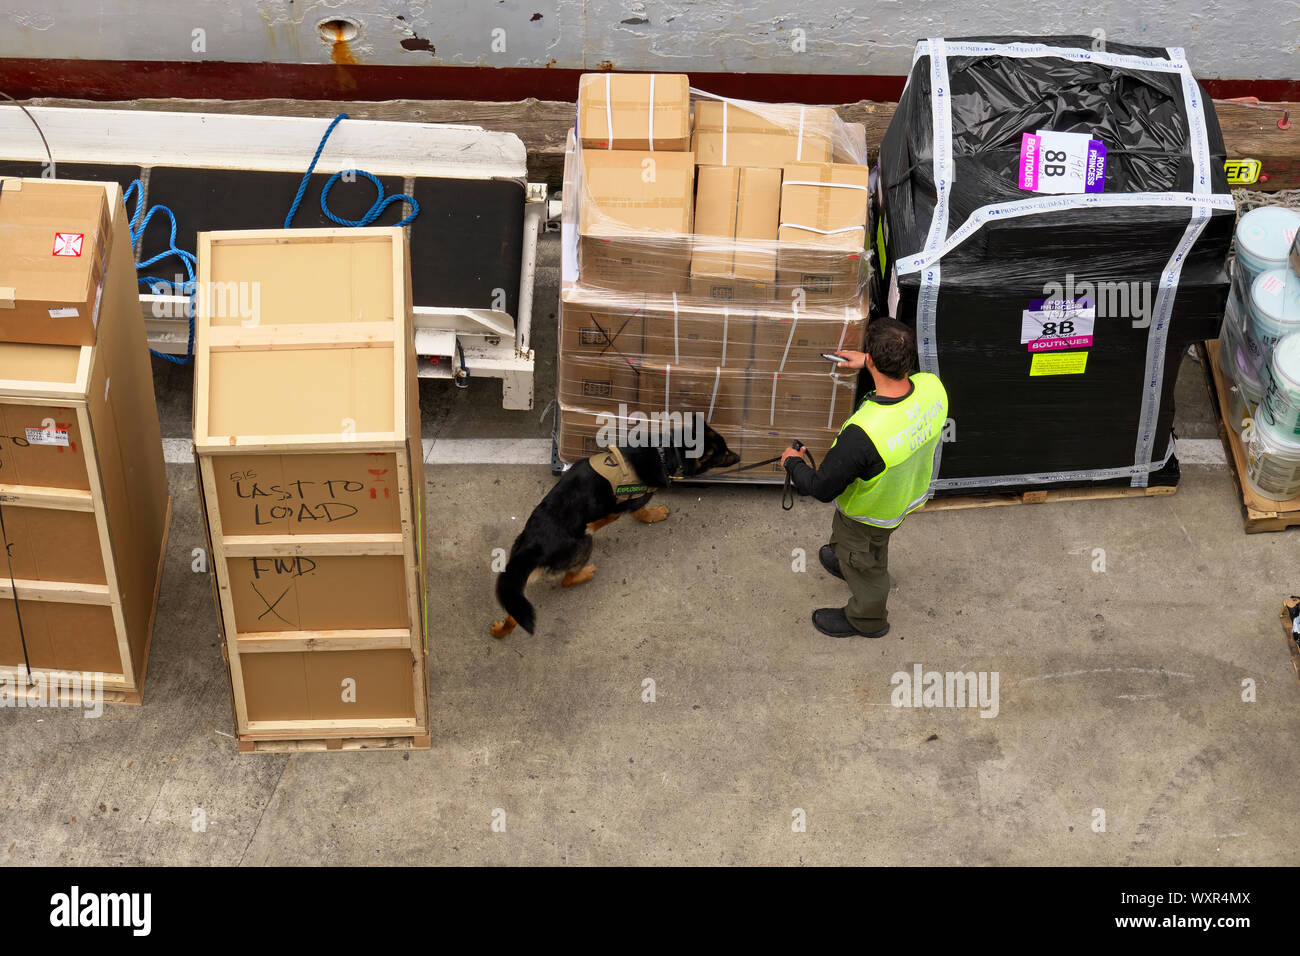 Dog and Handler of a K9 Detection Unit Checking the Cargo of a Cruise Ship for Explosives Before Being Loaded. Vancouver, B. C., Canada June 8, 2019 Stock Photo